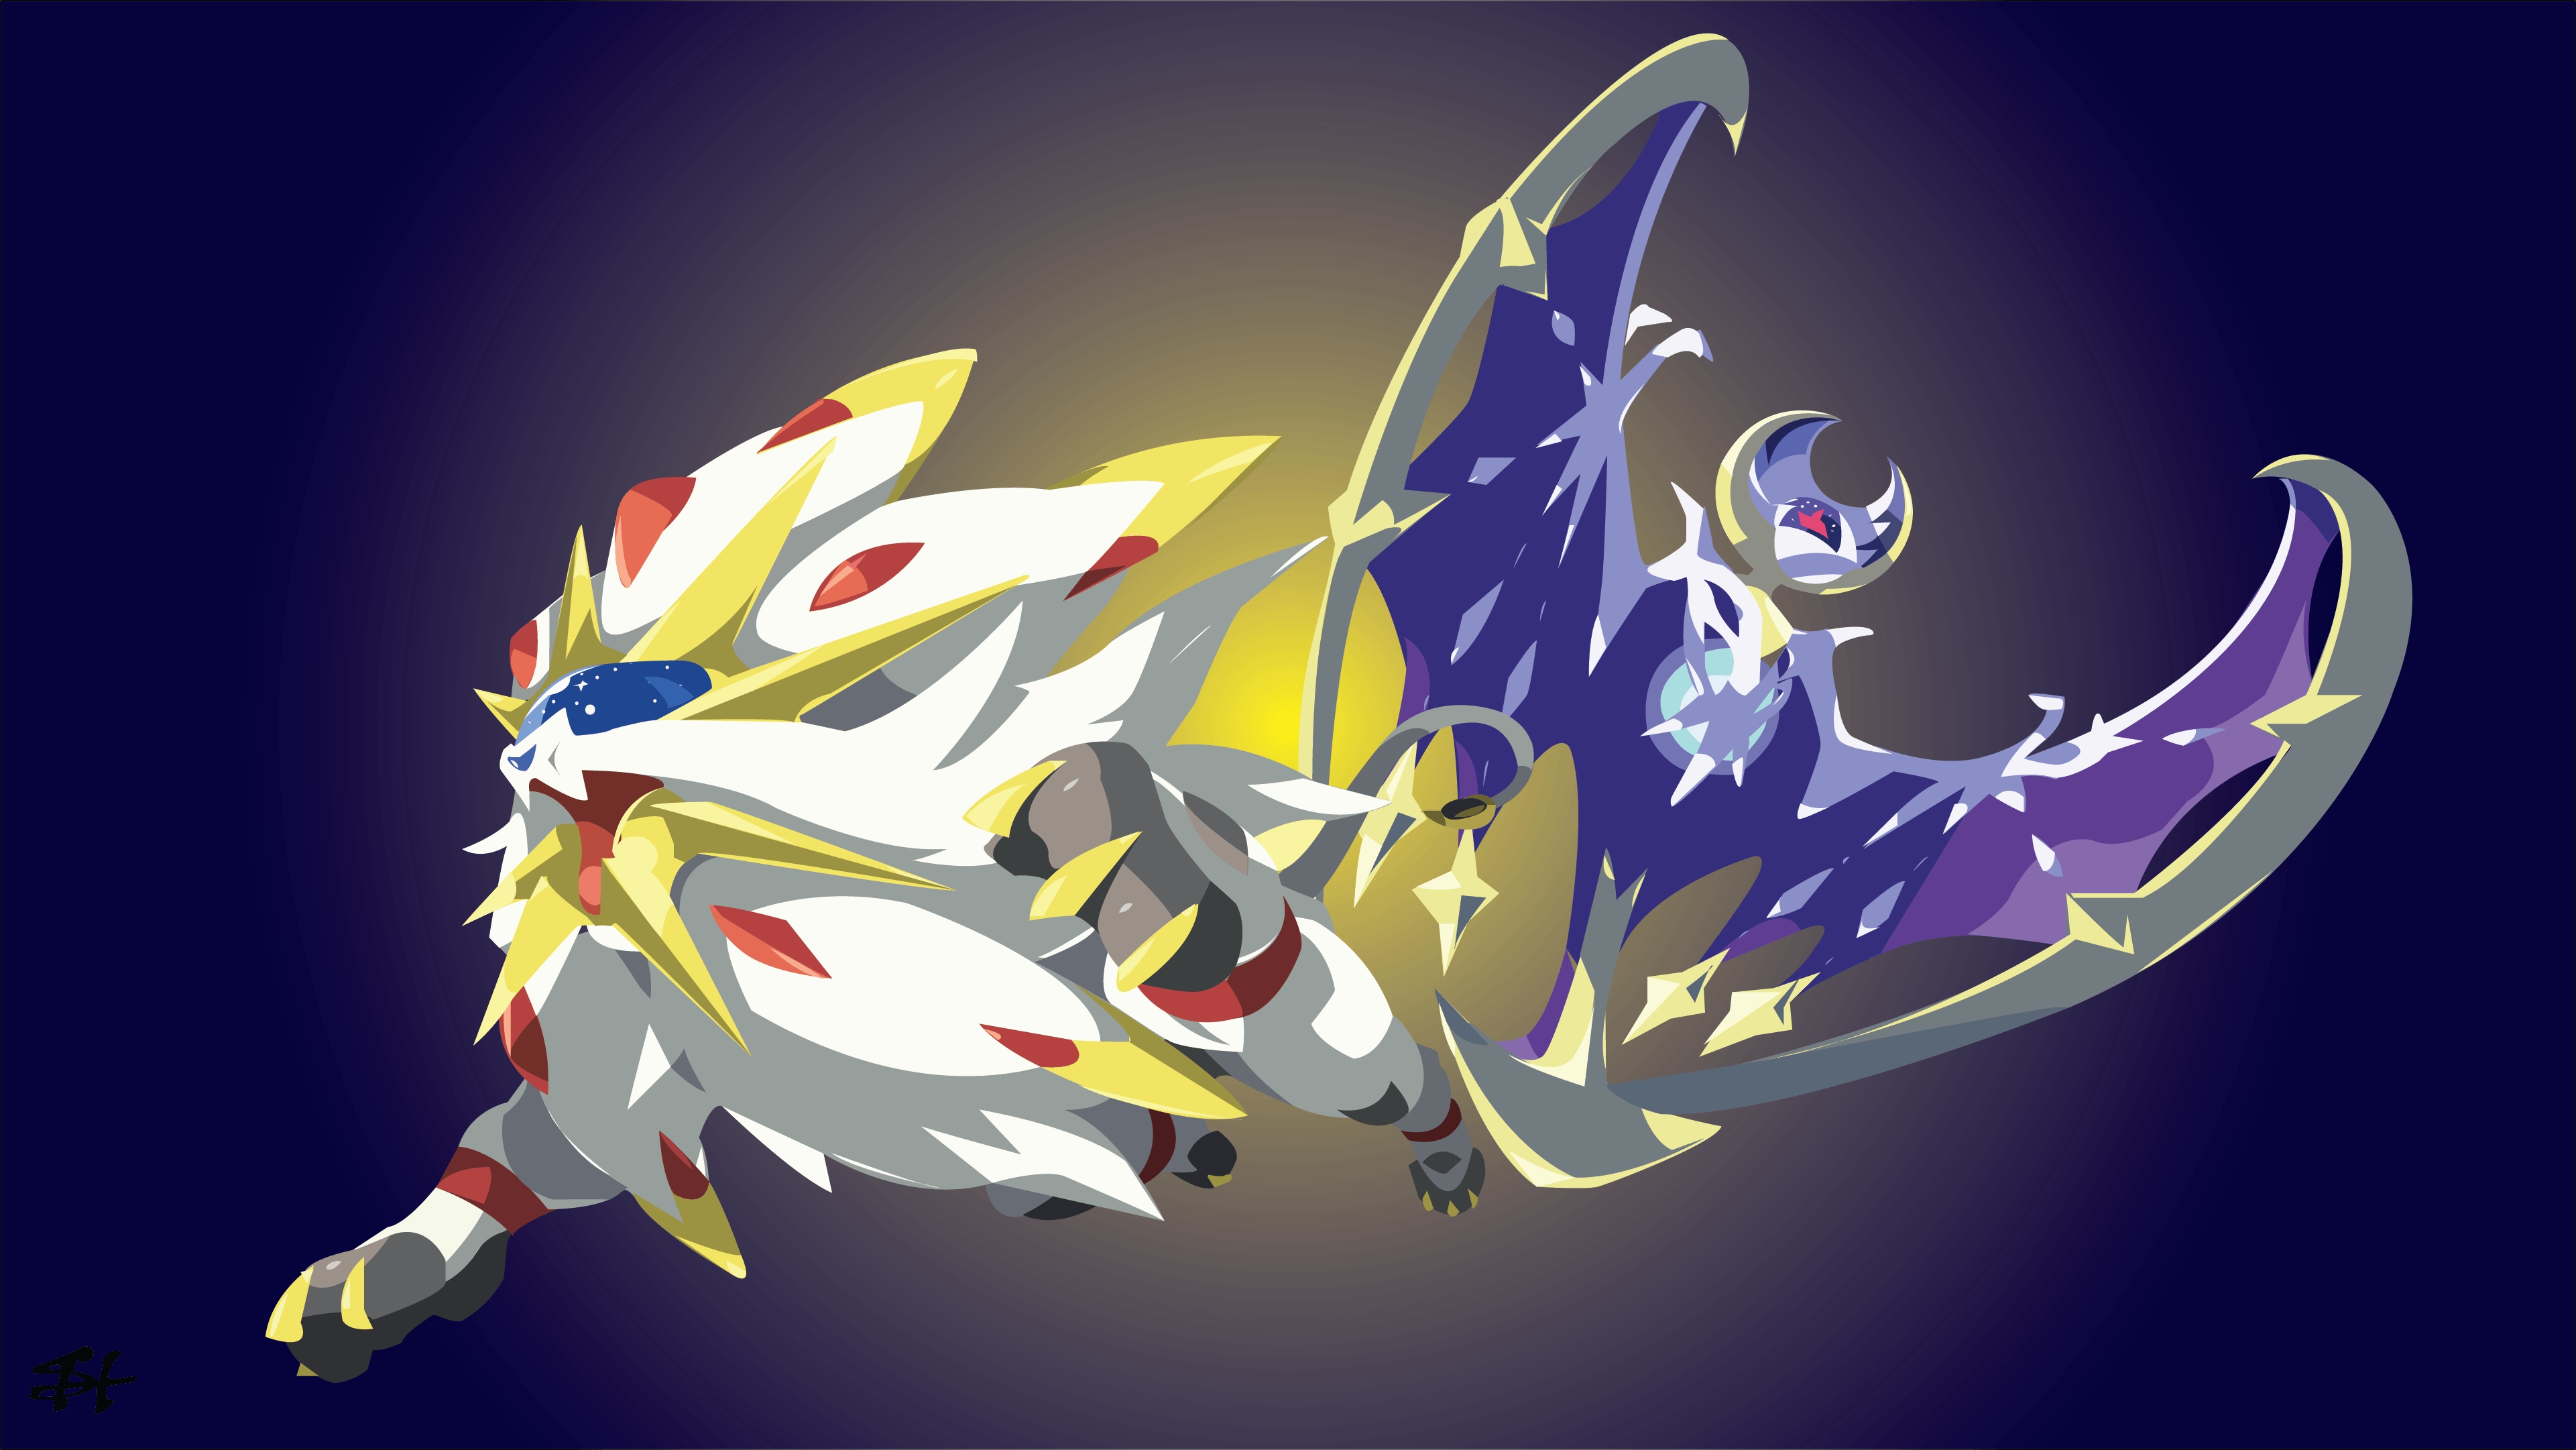 10 Best Pokemon Sun And Moon Wallpaper 1920X1080 FULL HD 1080p For PC Background